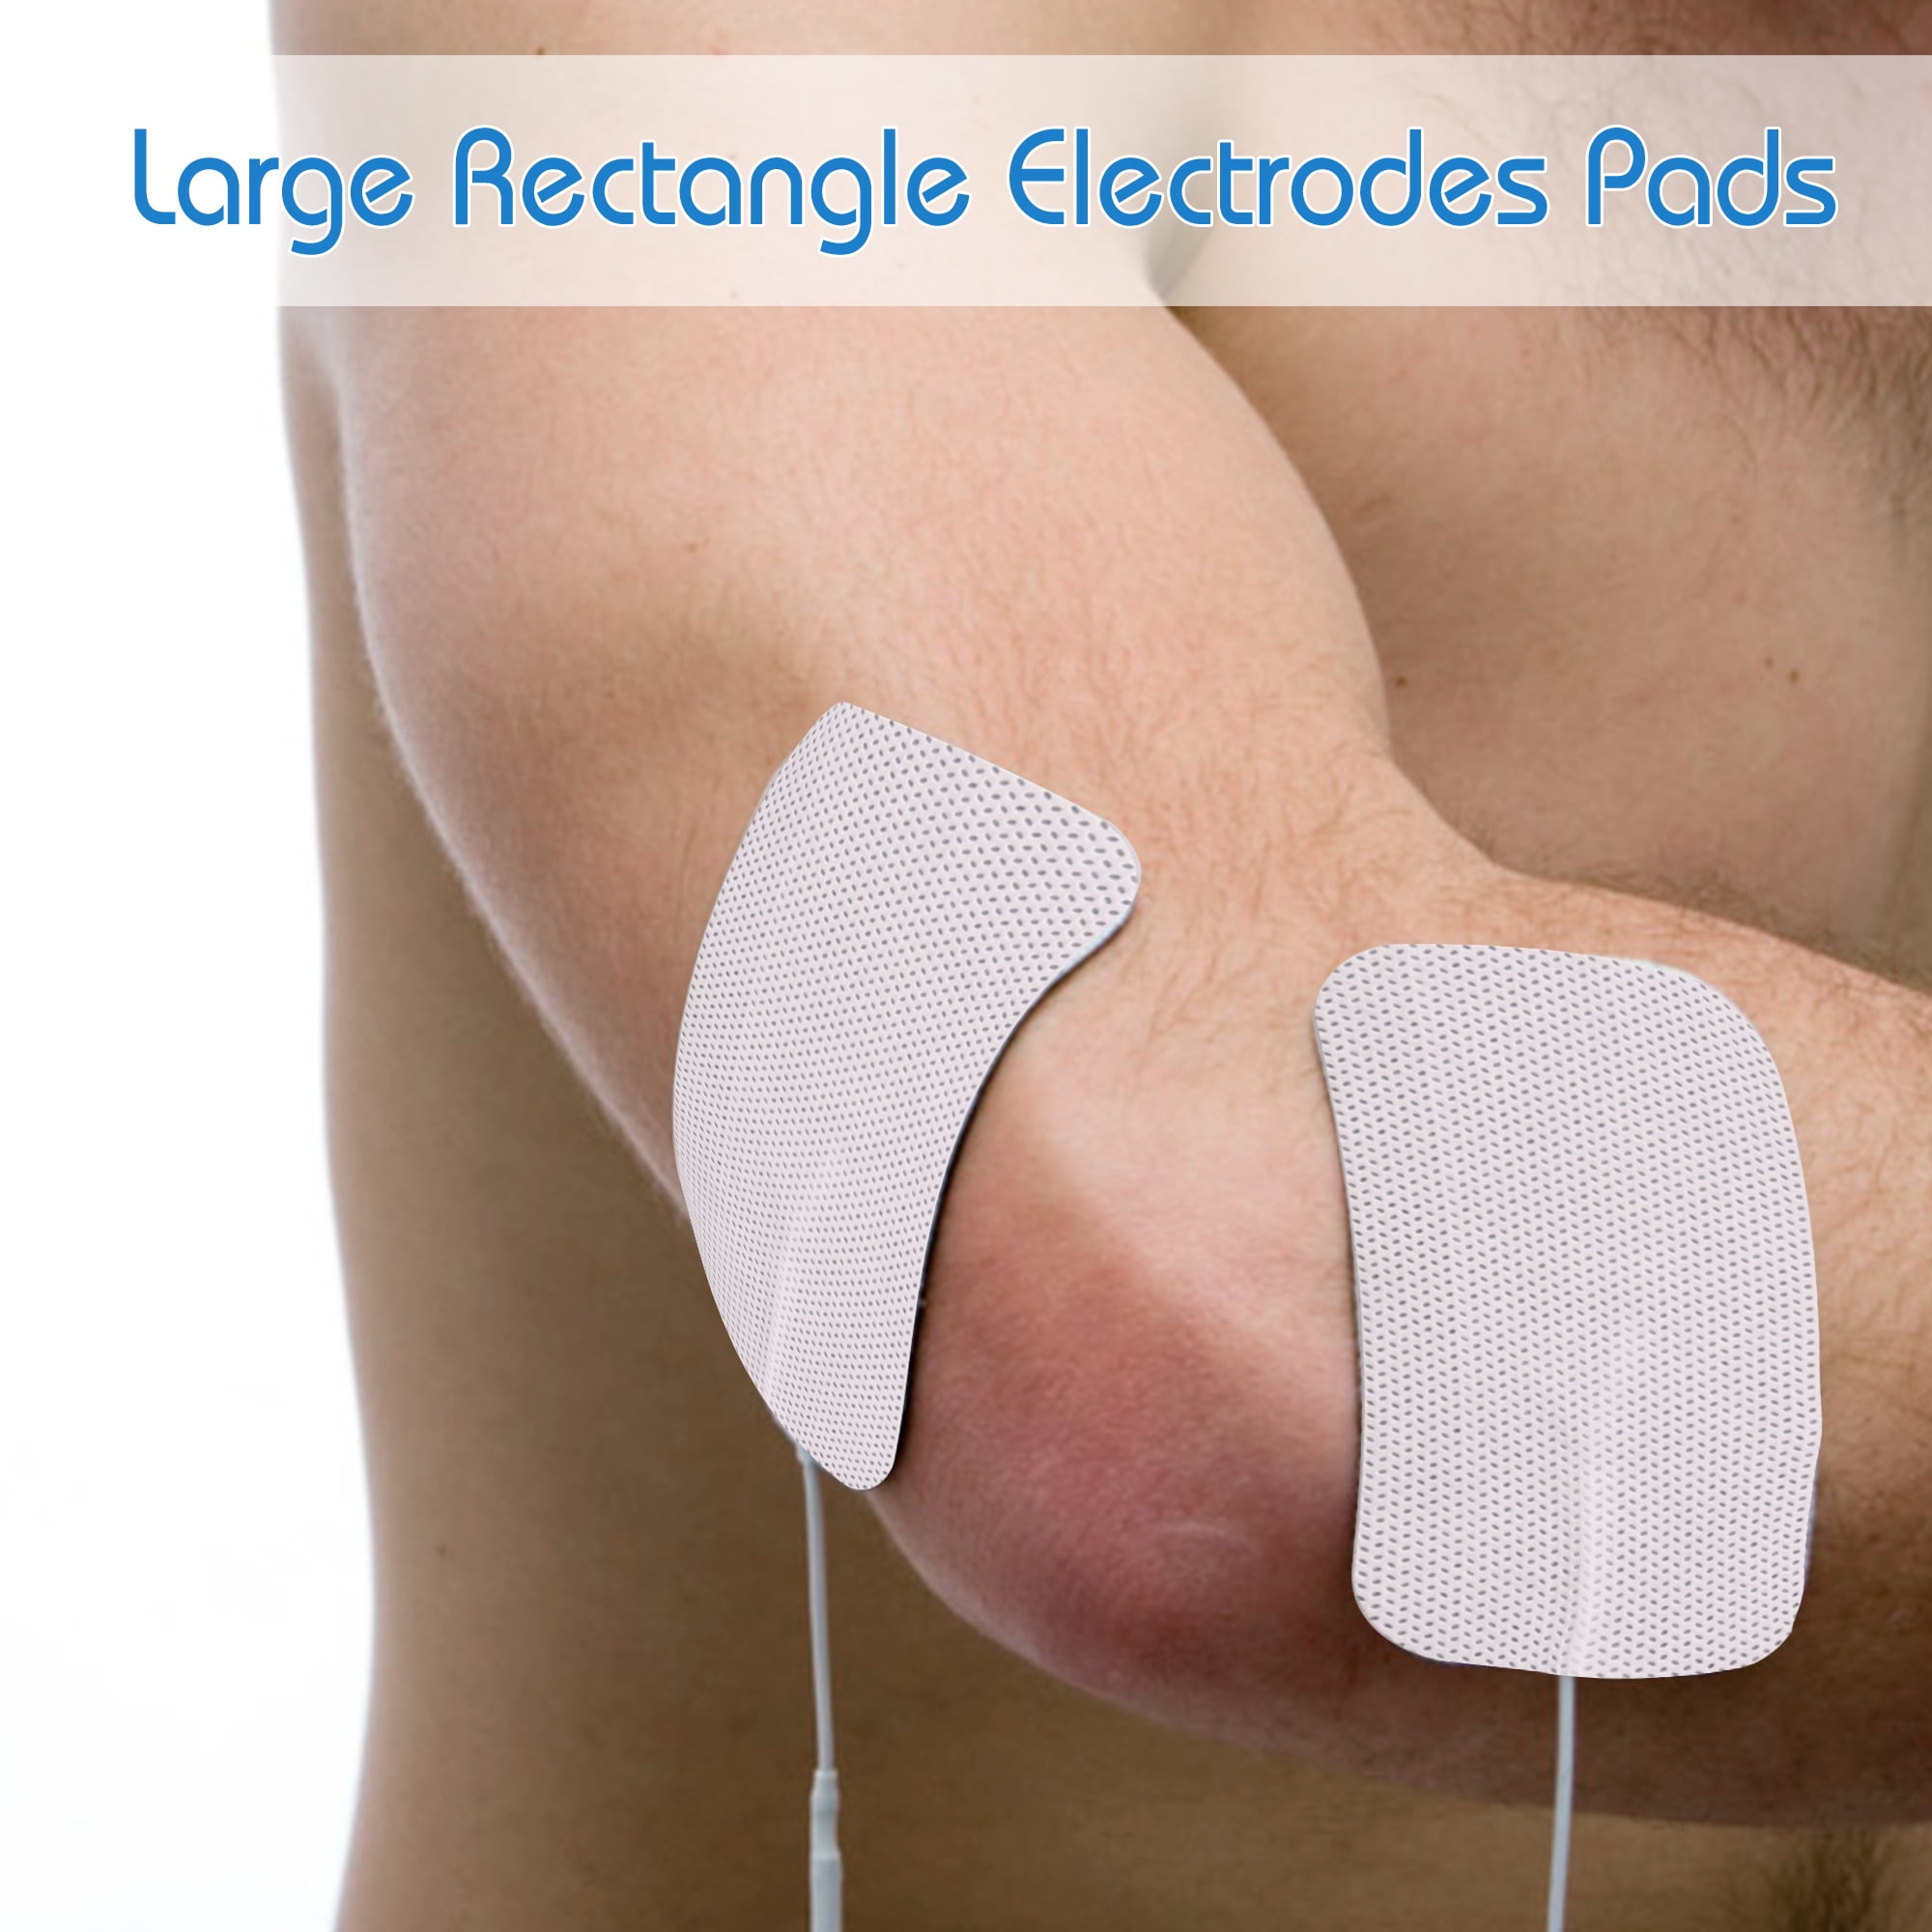 TENS Unit Replacement Pads 2”x2”, 20 Pcs TENS Electrode Pads for  Electrotherapy, Self-Adhesive TENS Pads for EMS Muscle Stimulation Machine,  Reusable